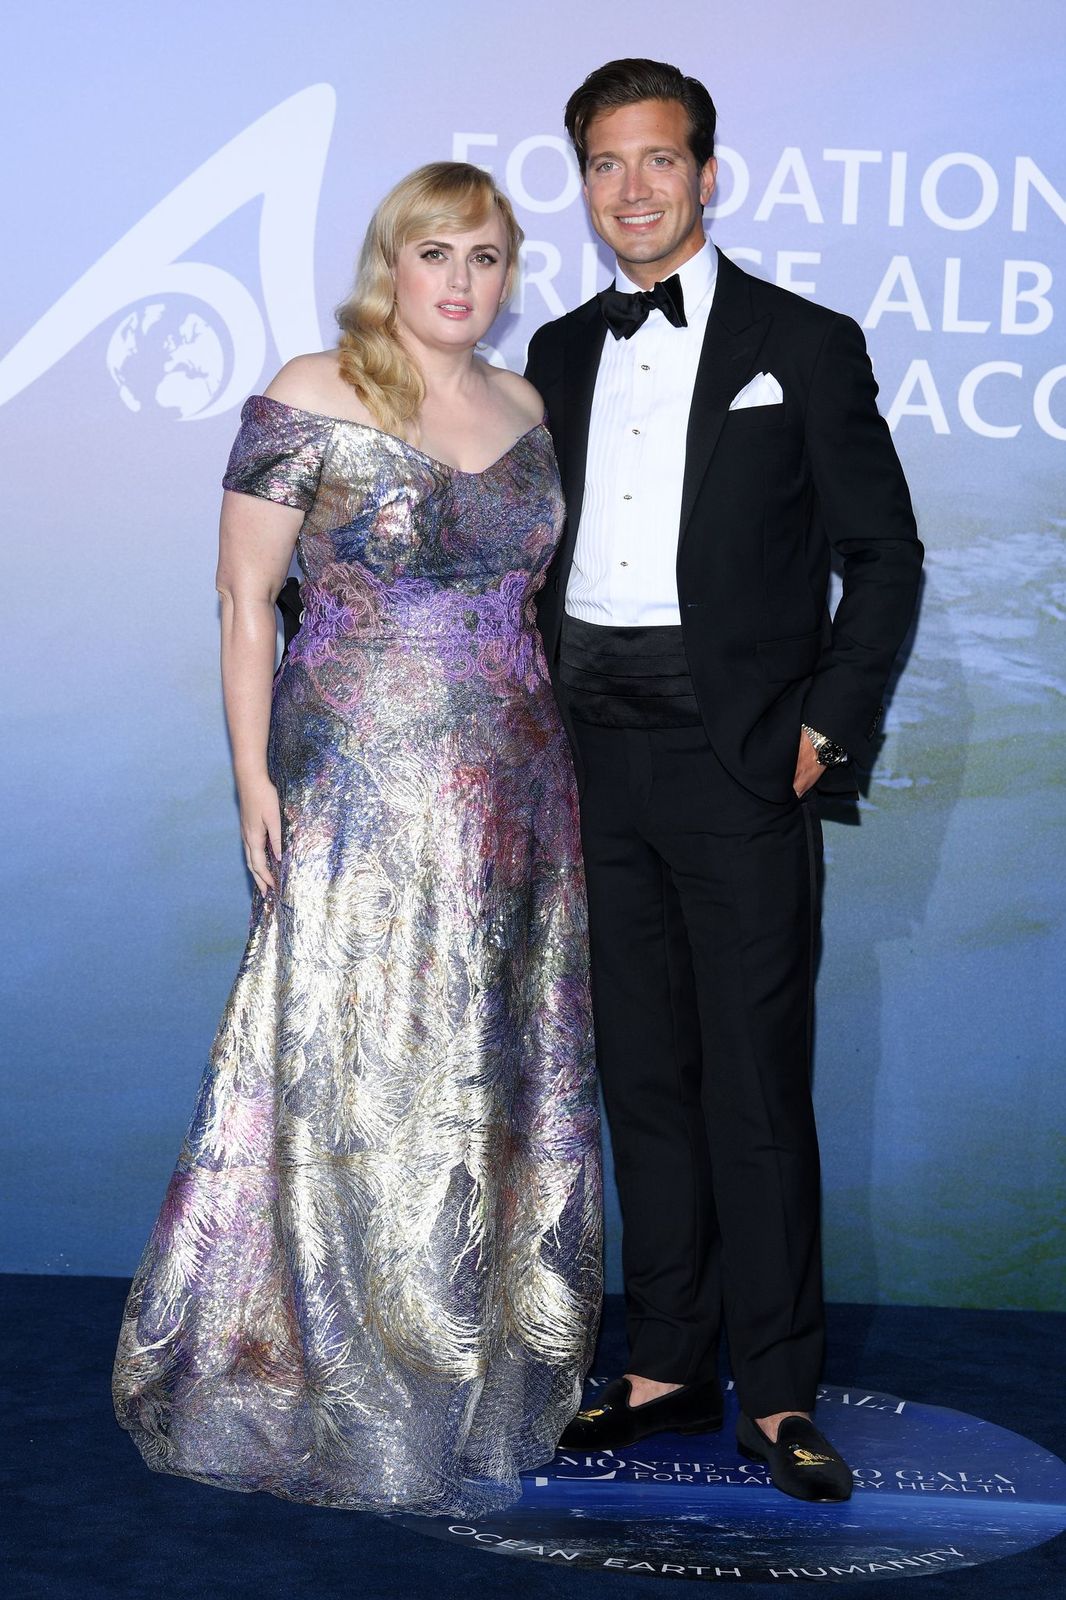 Rebel Wilson and Jacob Busch at the Monte-Carlo Gala For Planetary Health event on September 24, 2020, in Monaco | Photo: Pascal Le Segretain/Getty Images